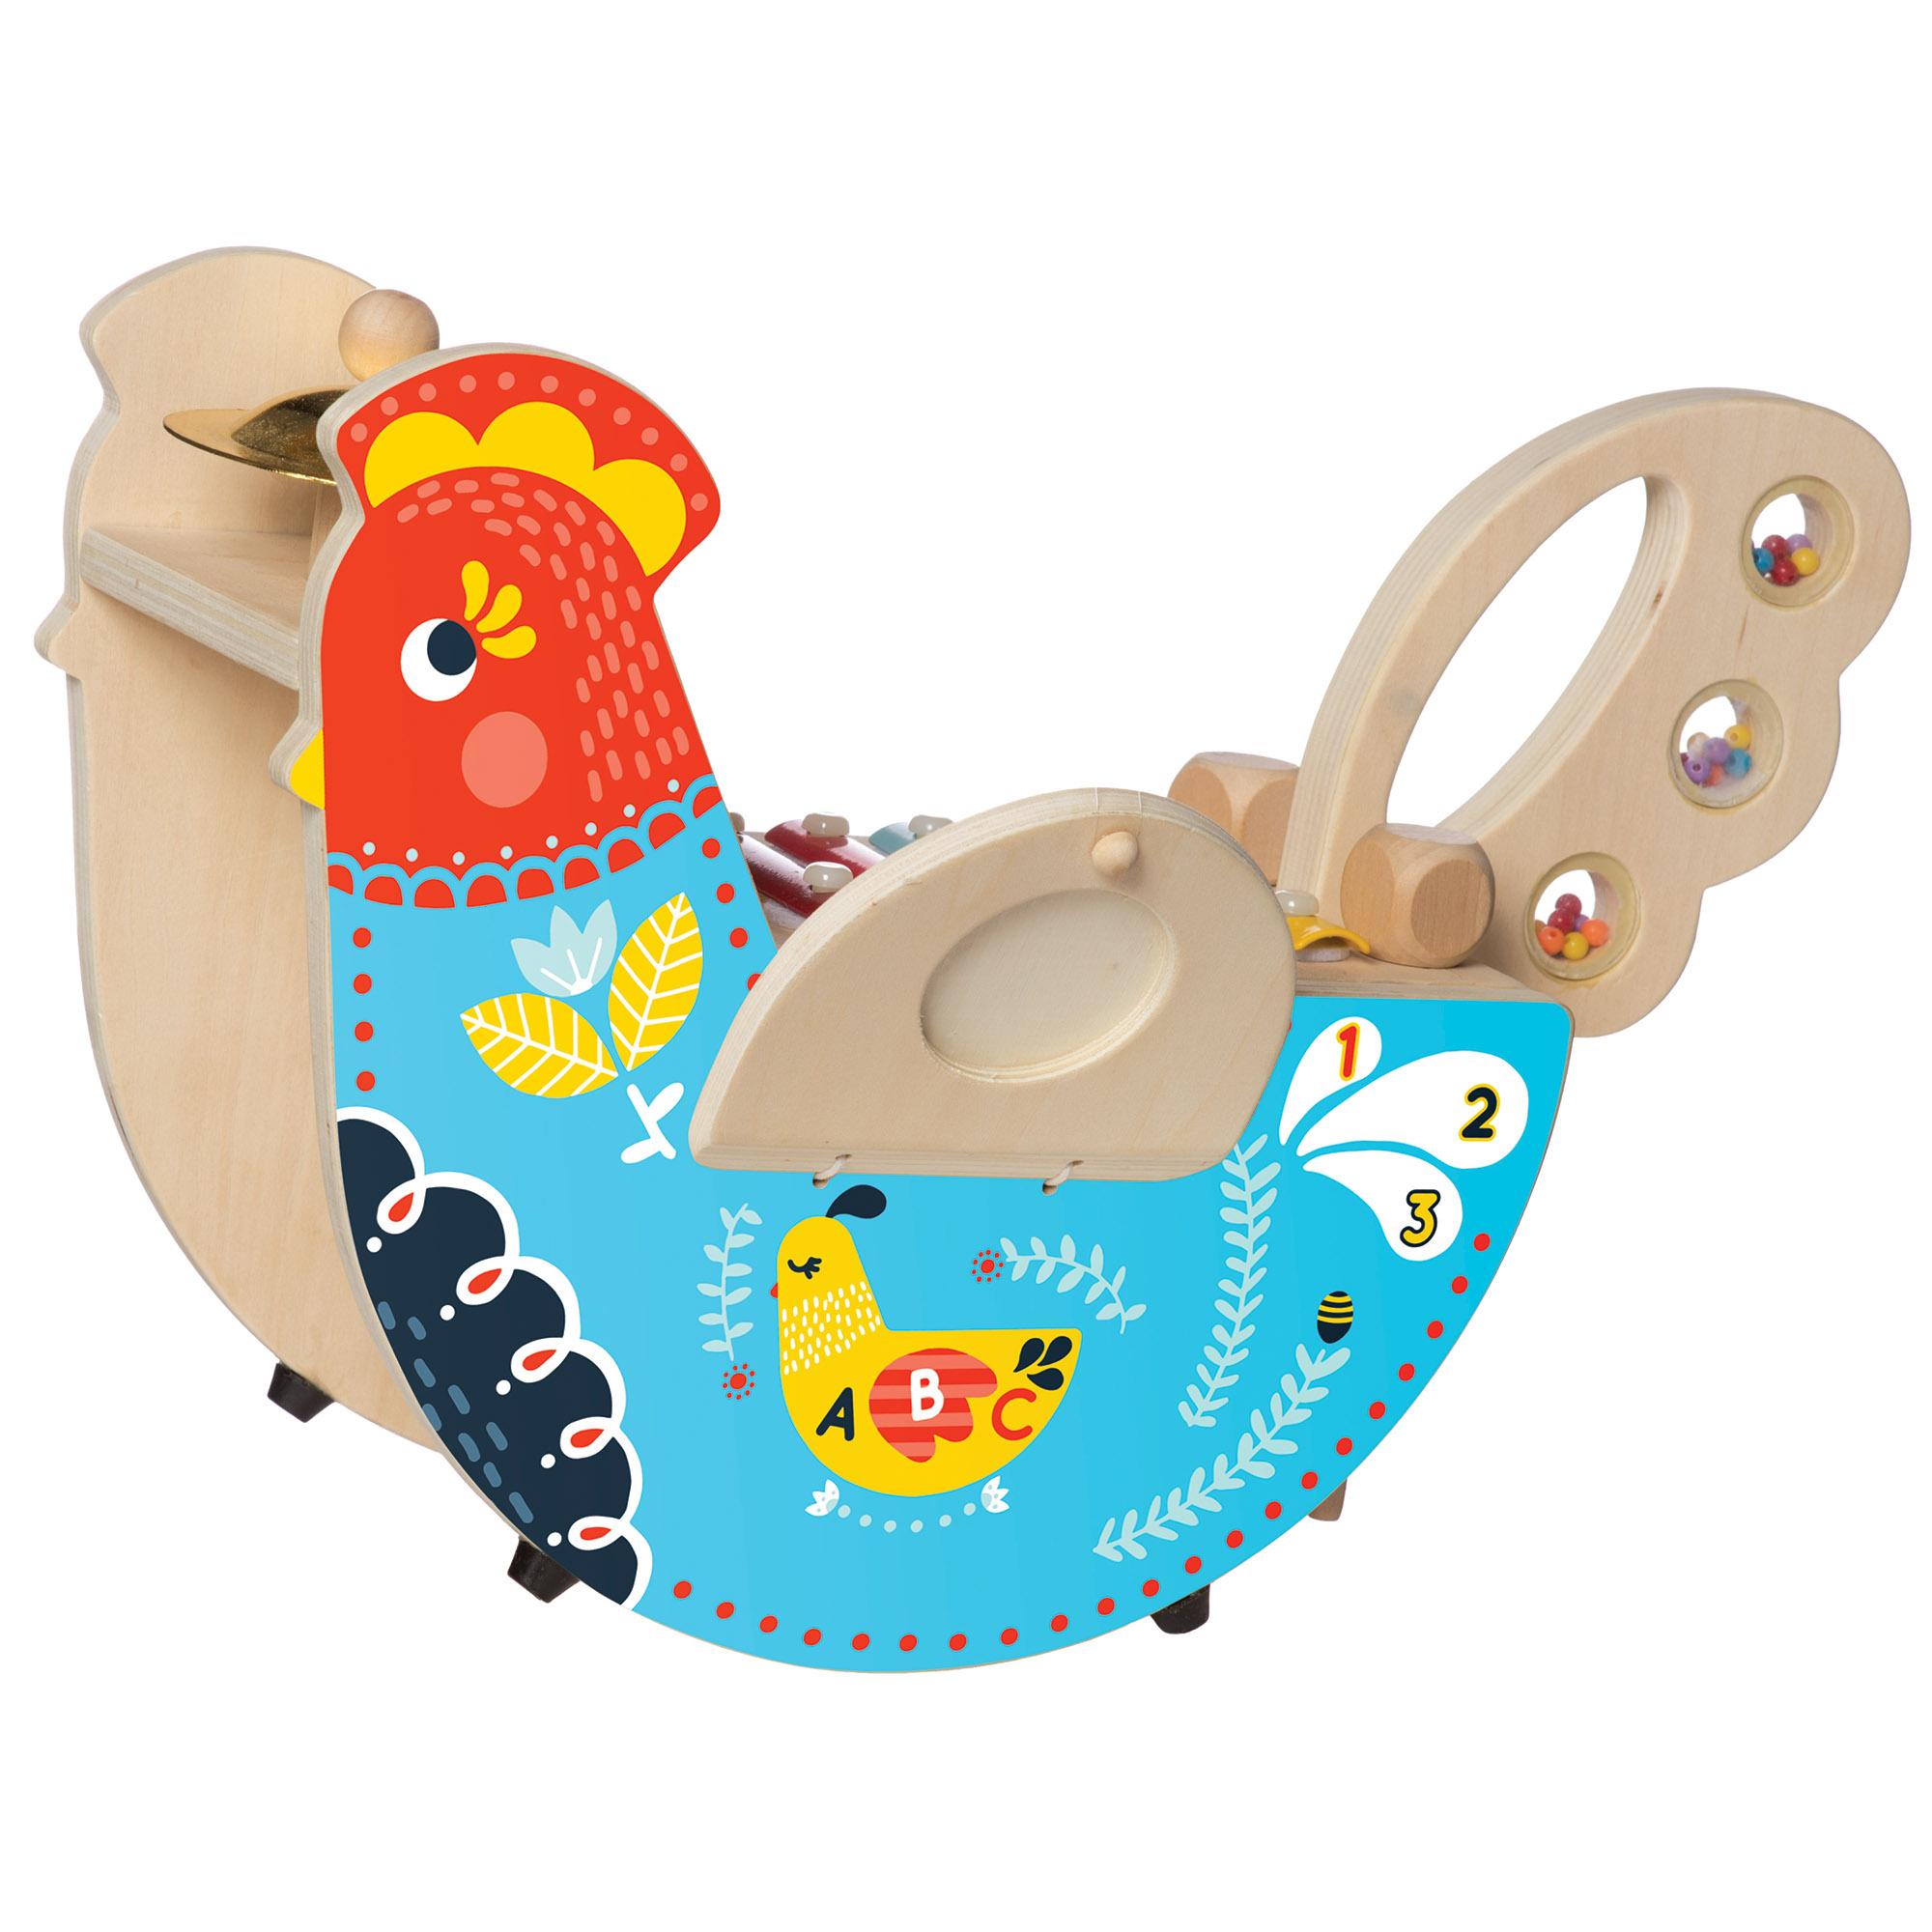 Manhattan Toy Musical Chicken Wooden Instrument for Toddlers with Xylophone, Drumsticks, Cymbal and Maraca - image 2 of 9